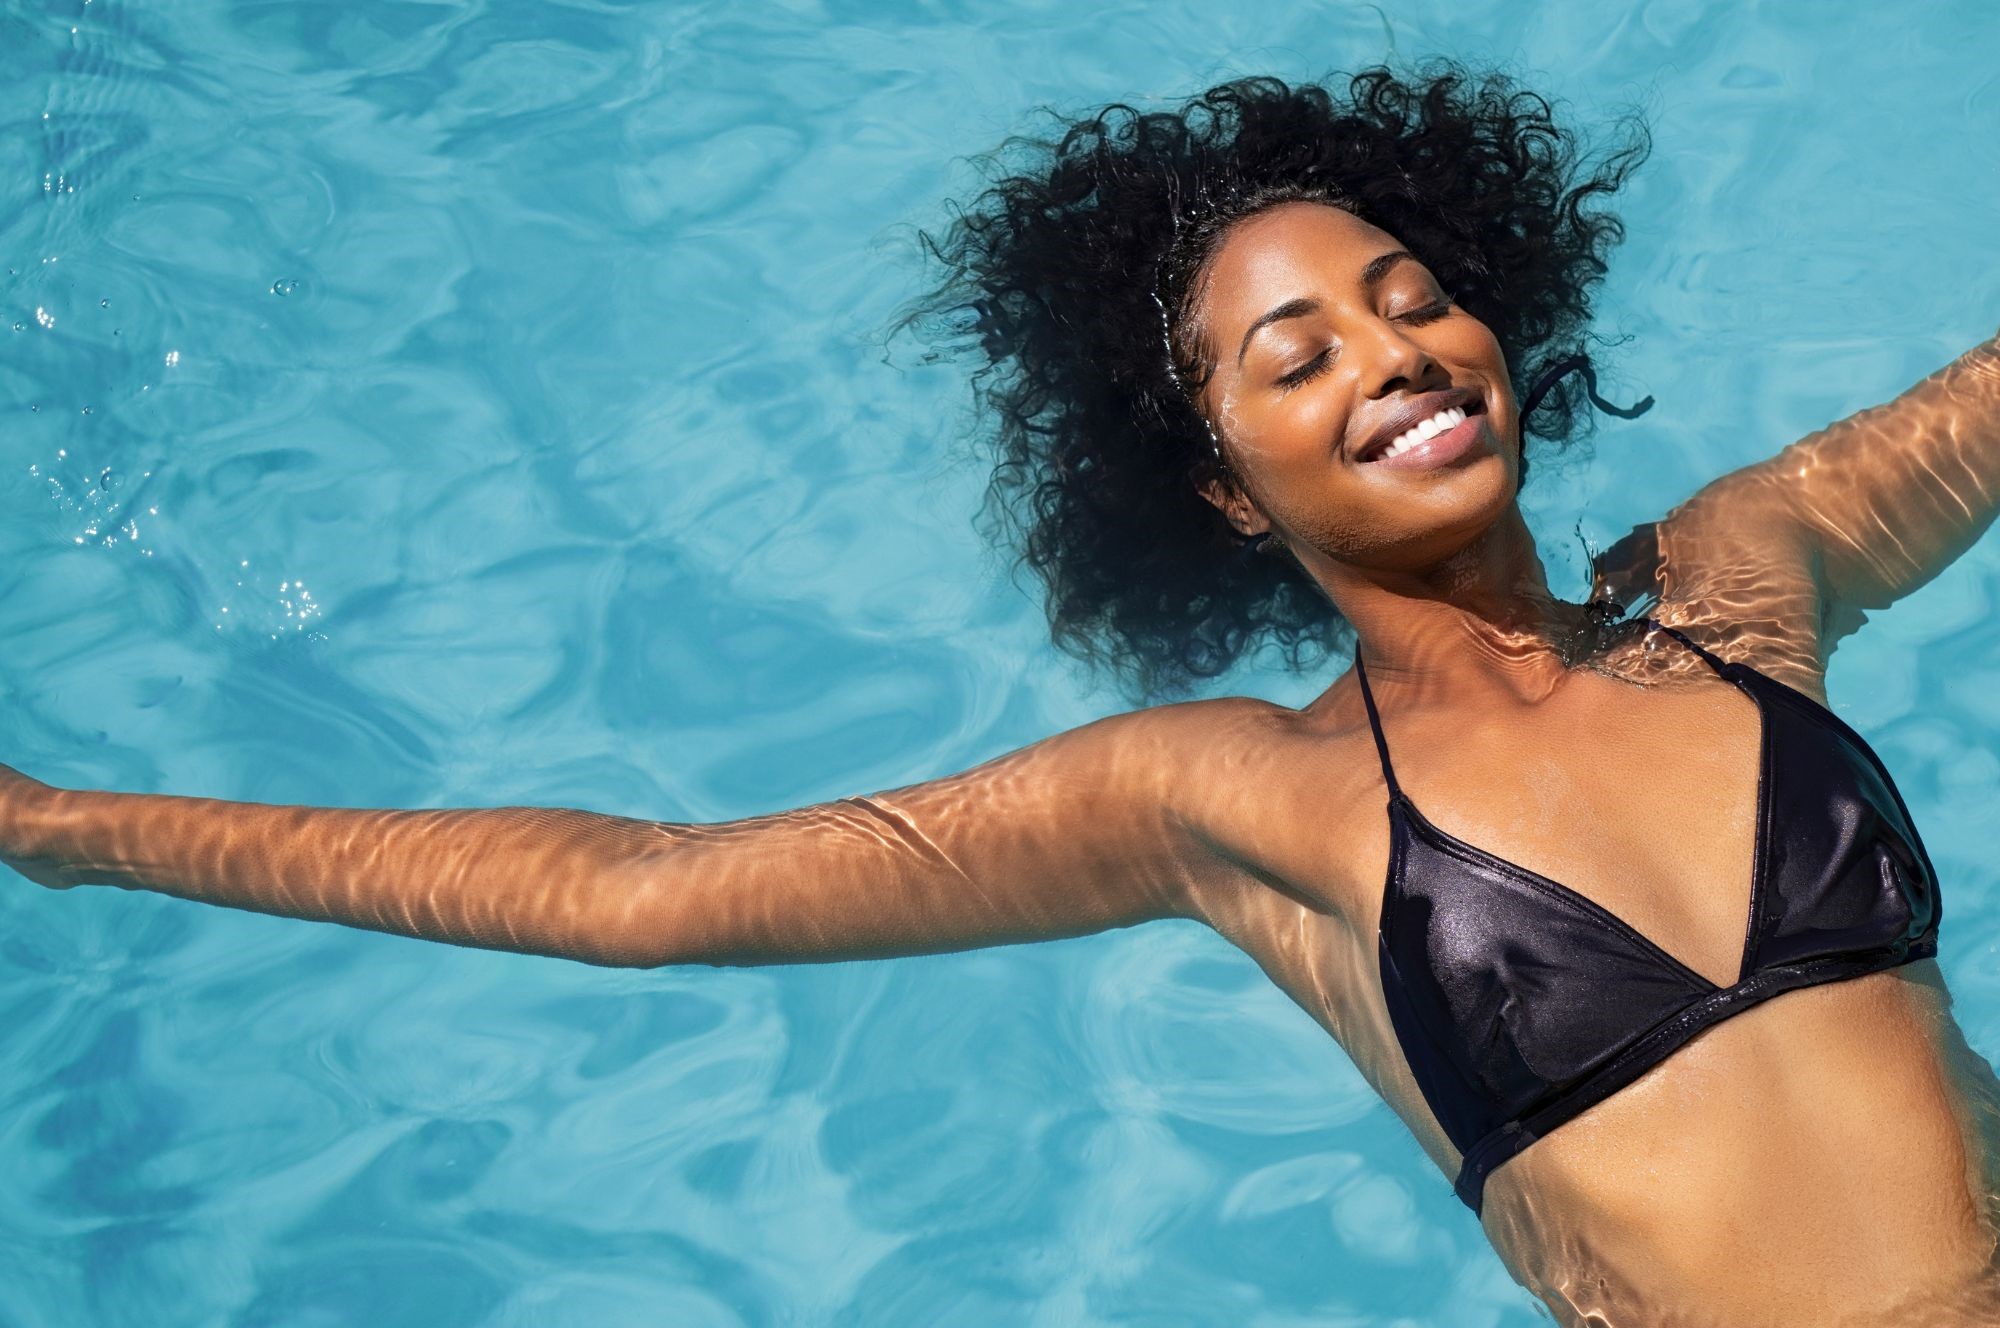 Committing to the permanent results of laser hair removal means you’ll always be pool-ready!